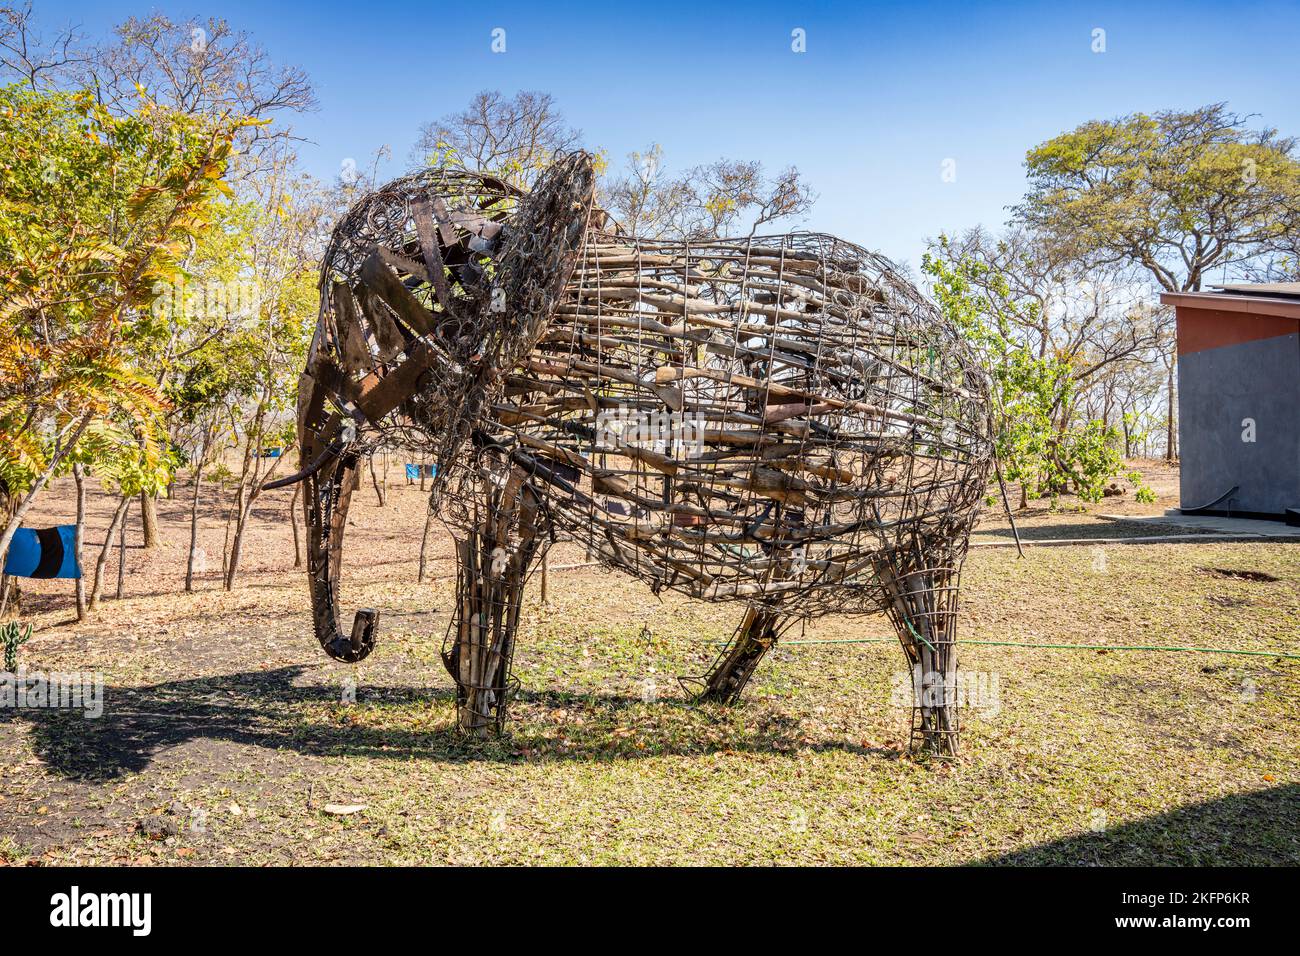 Elephant sculpture constructed from guns, knives and traps confiscated from poachers in Nkhotakota wildlife reserve, Malawi Stock Photo